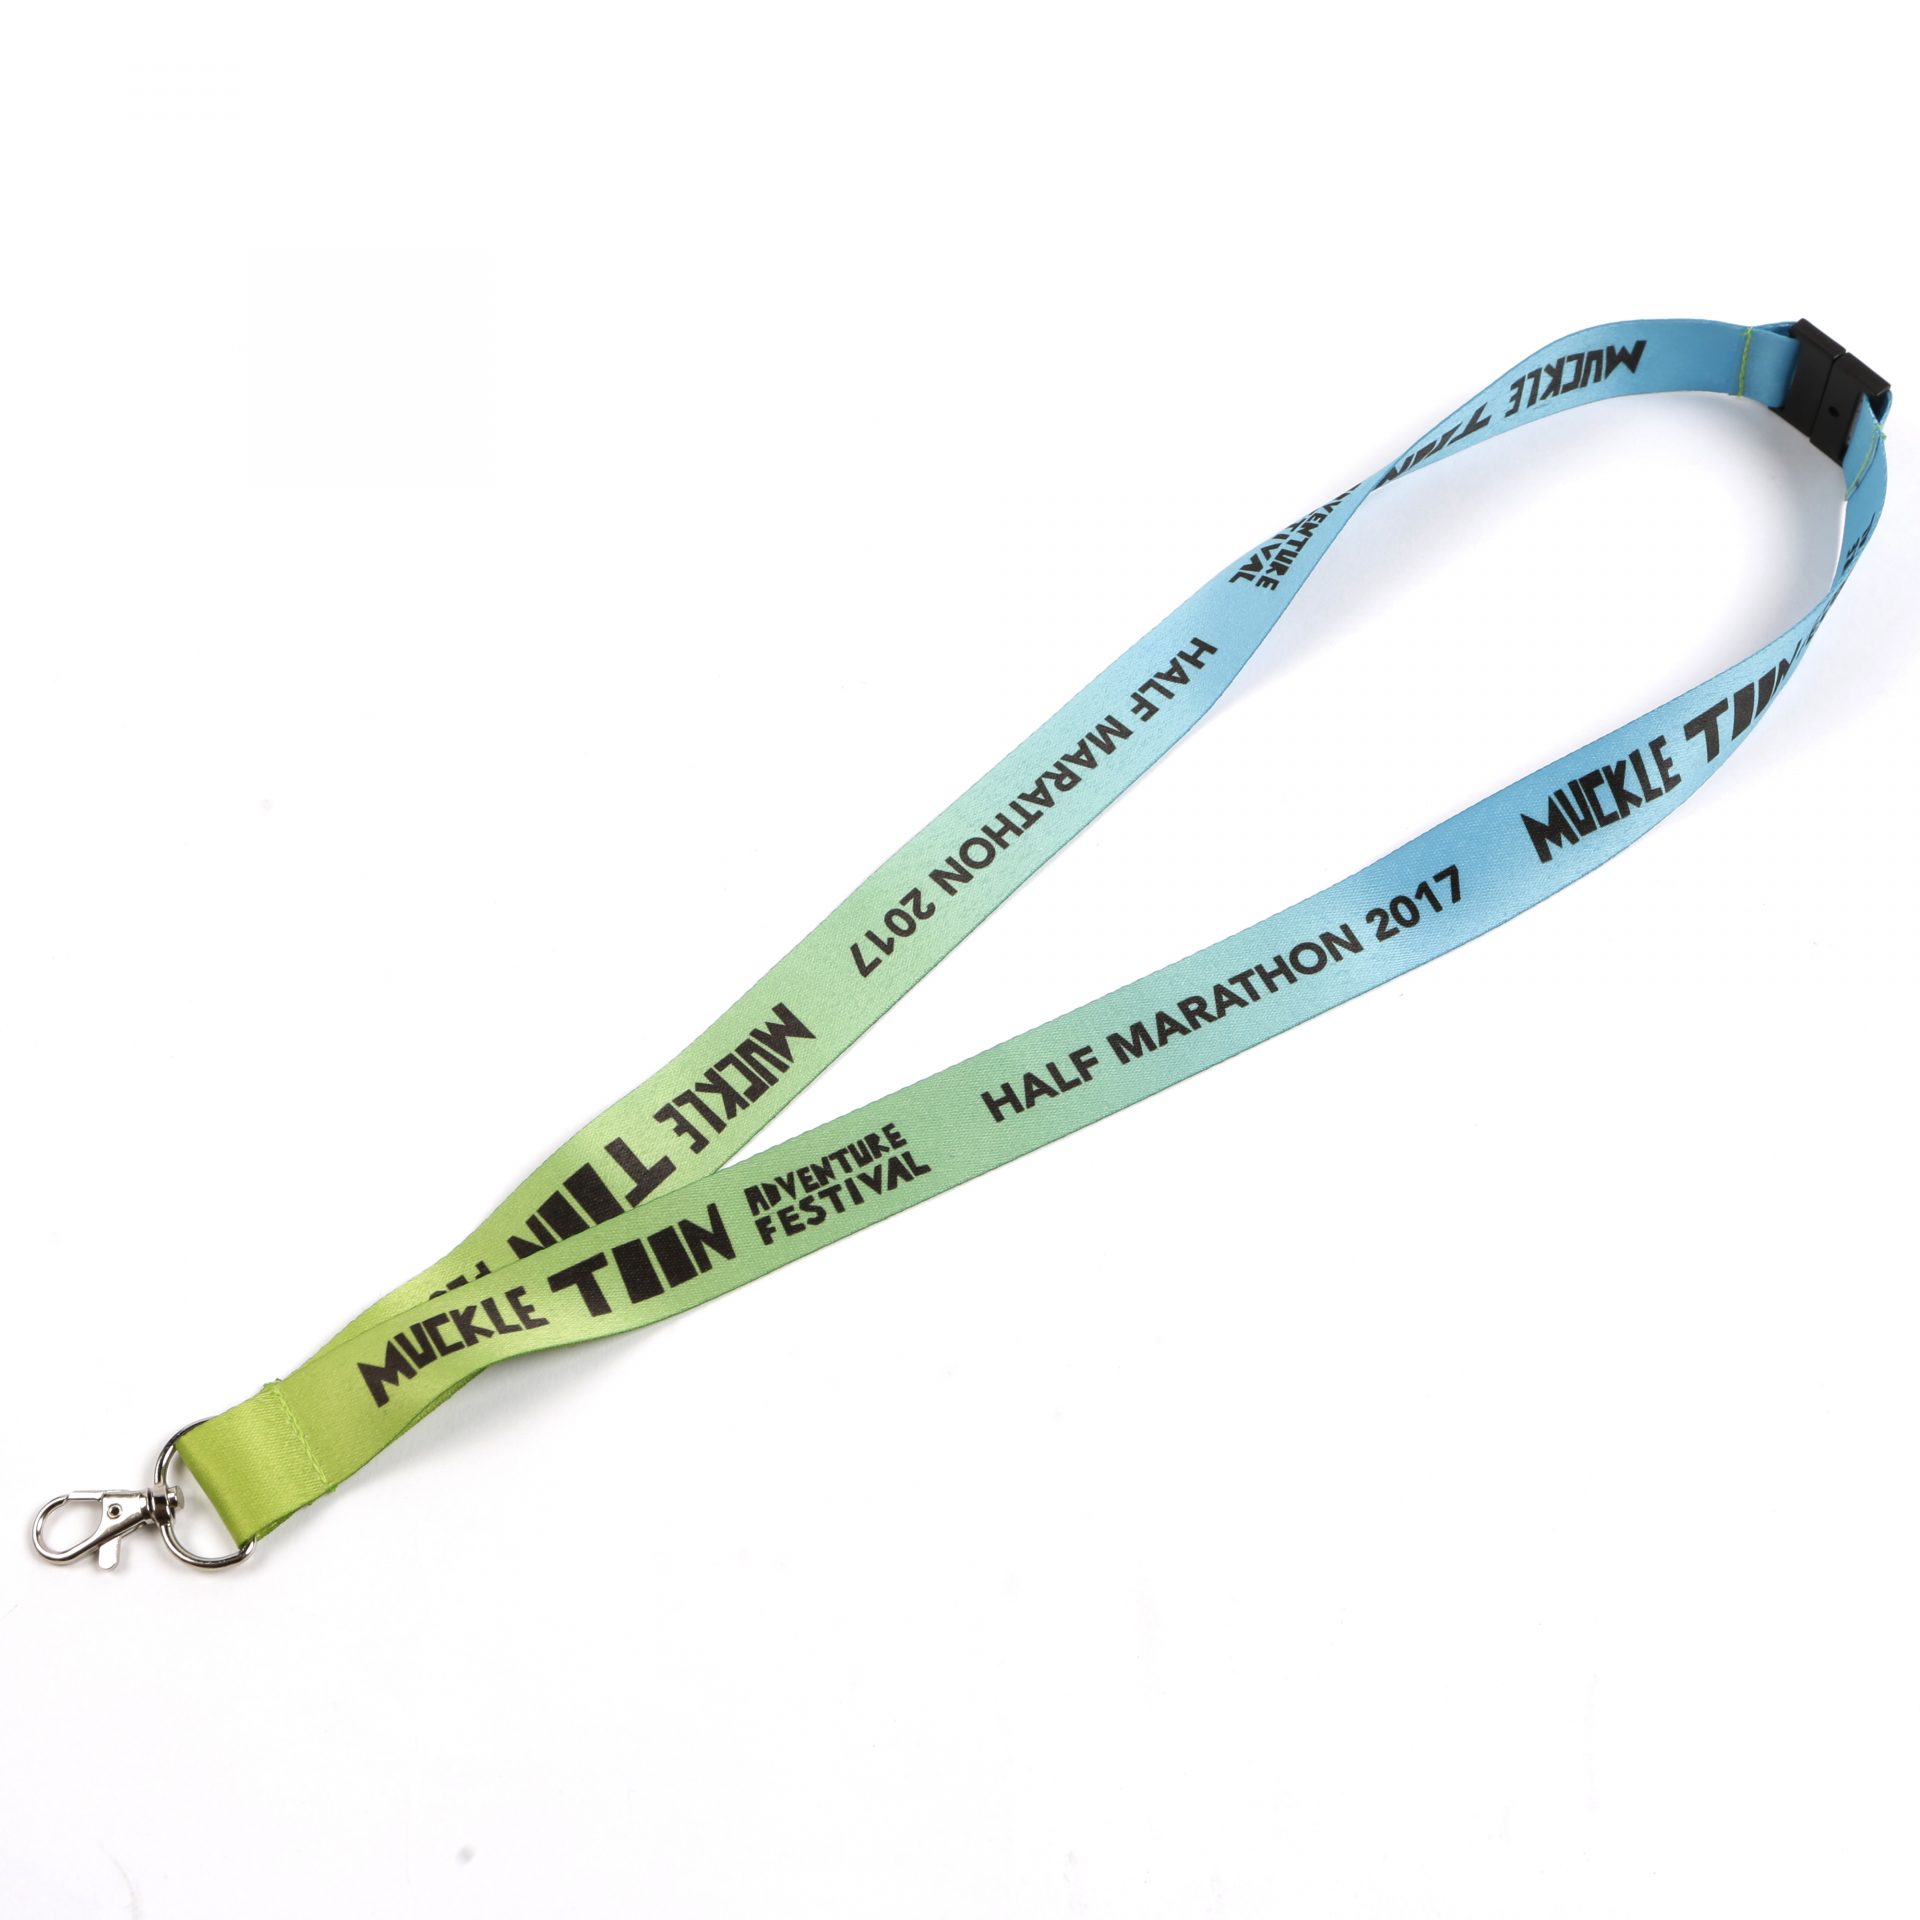 Buy Deluxe Full Colour Printed Lanyards on Lanyards Direct Today!